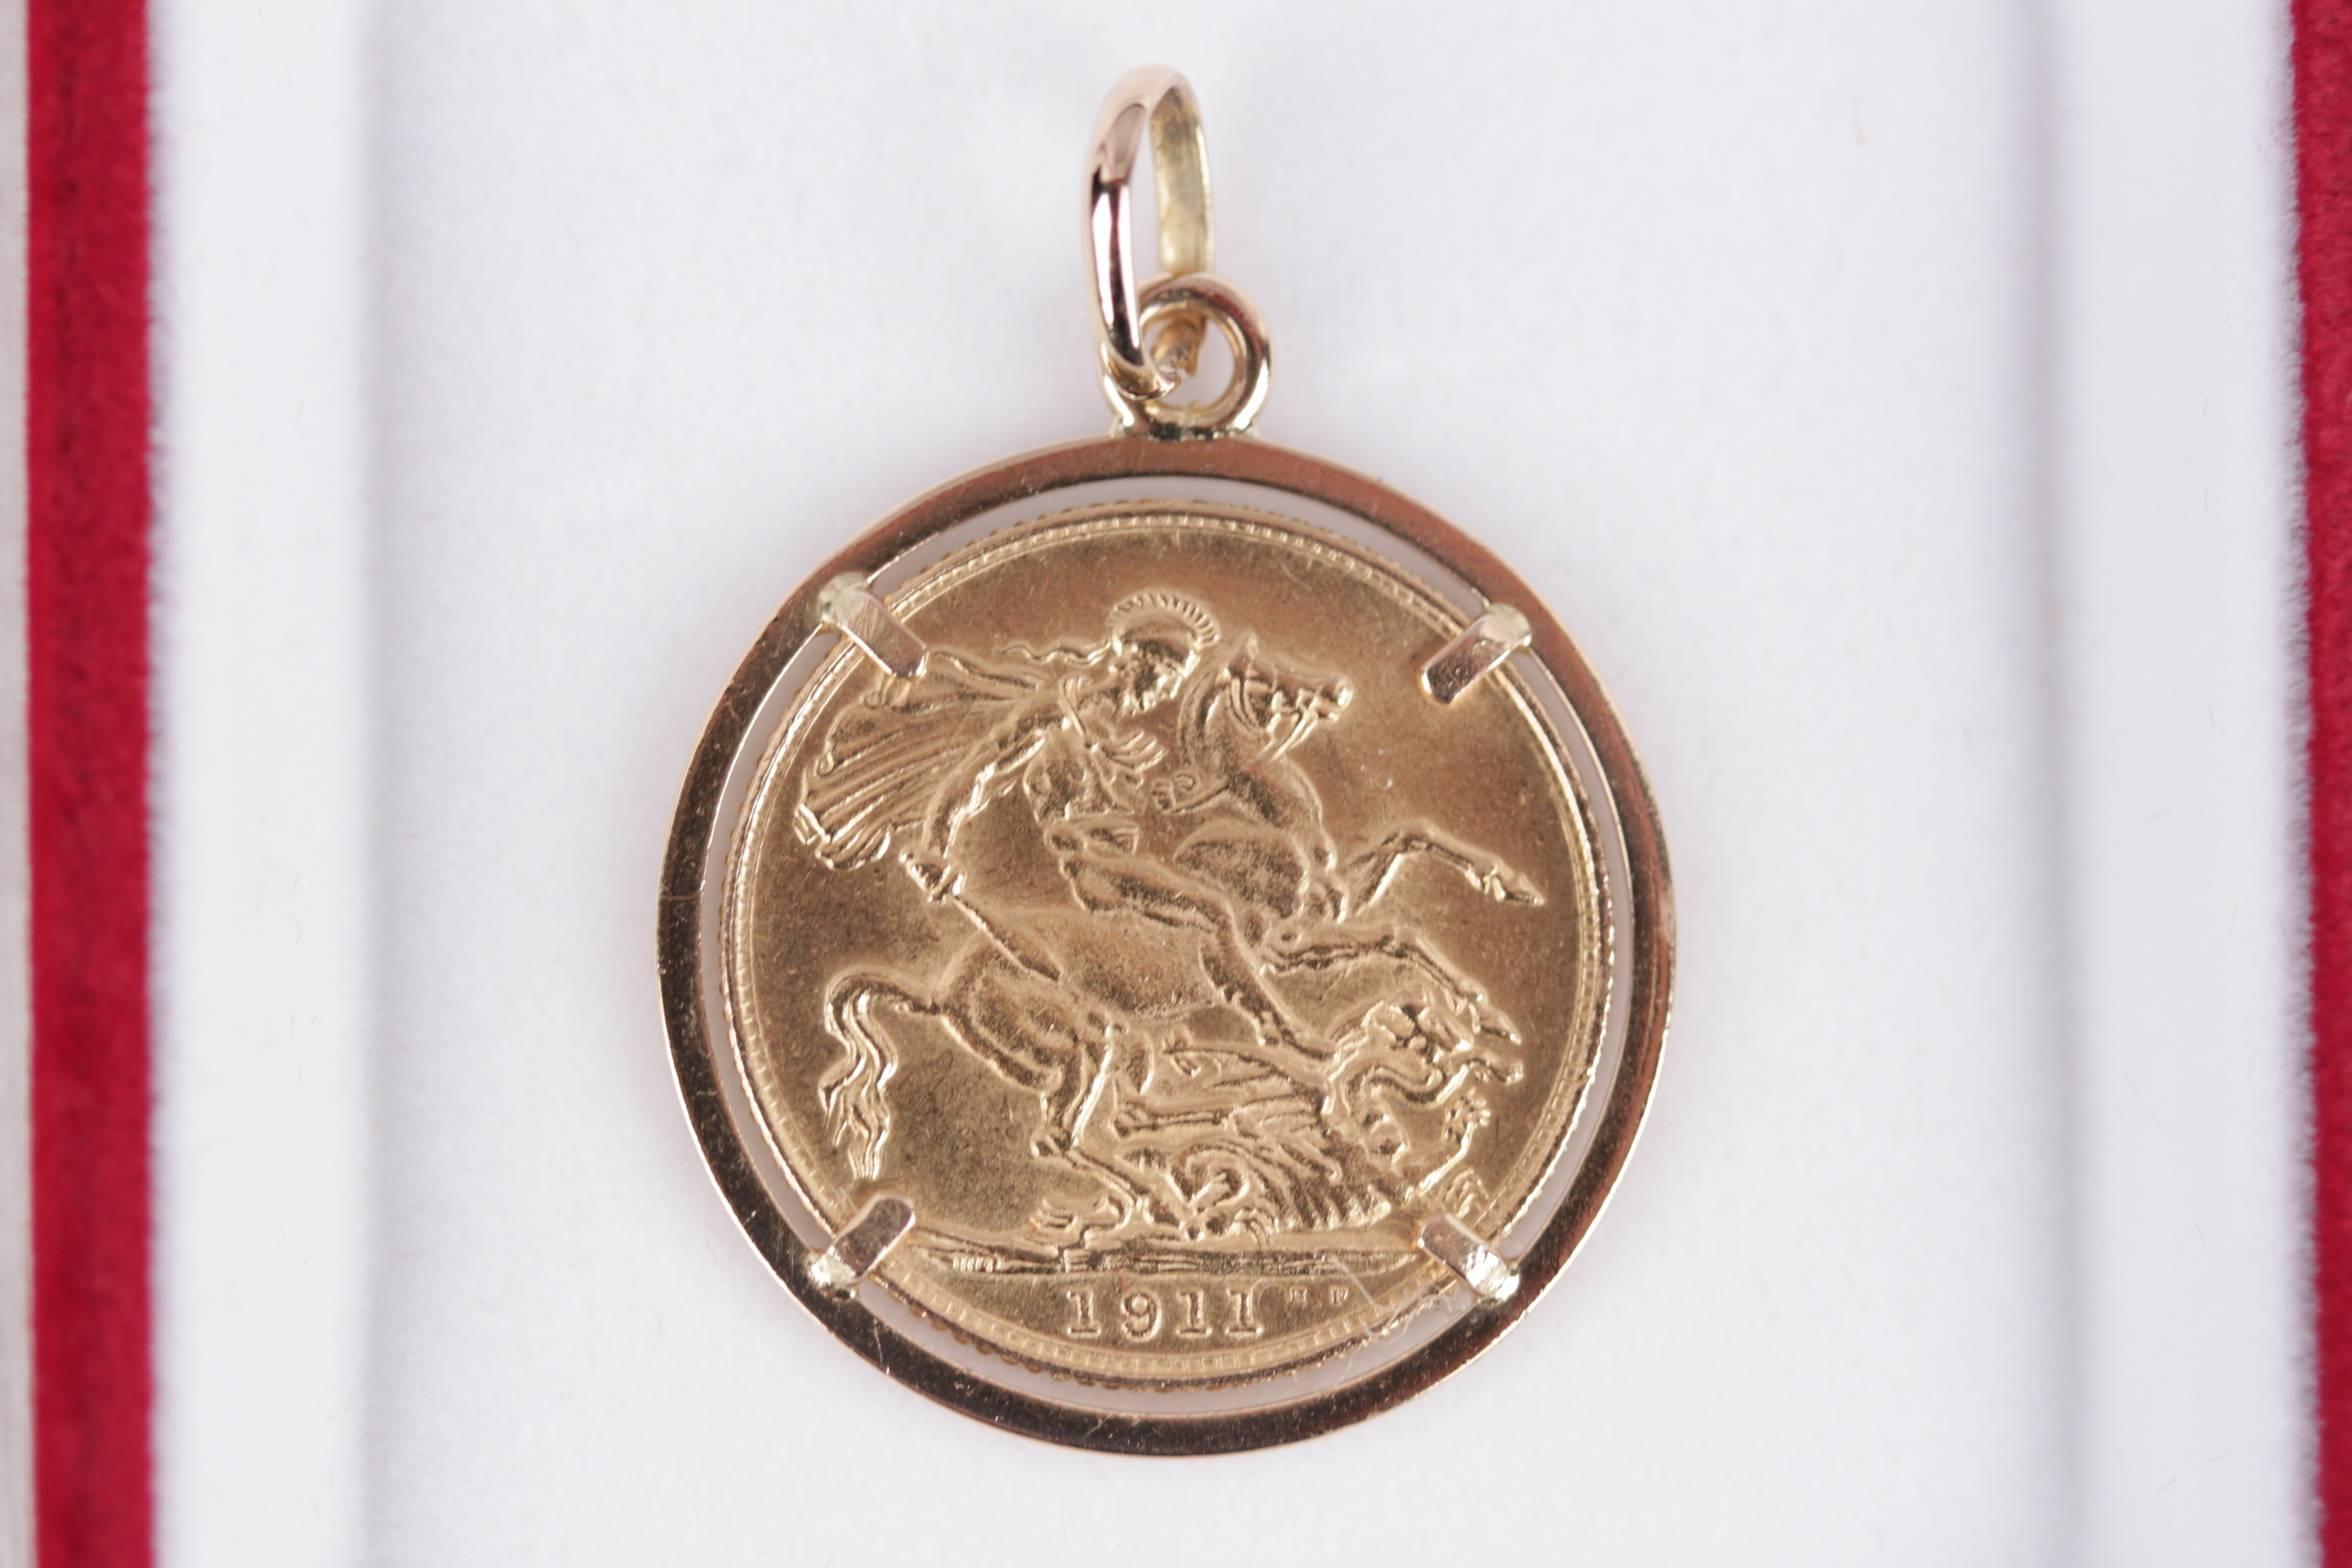  - This beautiful 22K gold sovereign coin medallion/pendant features King George V profile
- The head of the king is inscribed with 'GEORGIVS V D.G.BRITT OMN REX F.D.IND IMP' on the front of the coin
- This solid gold coin is dated 1911 and